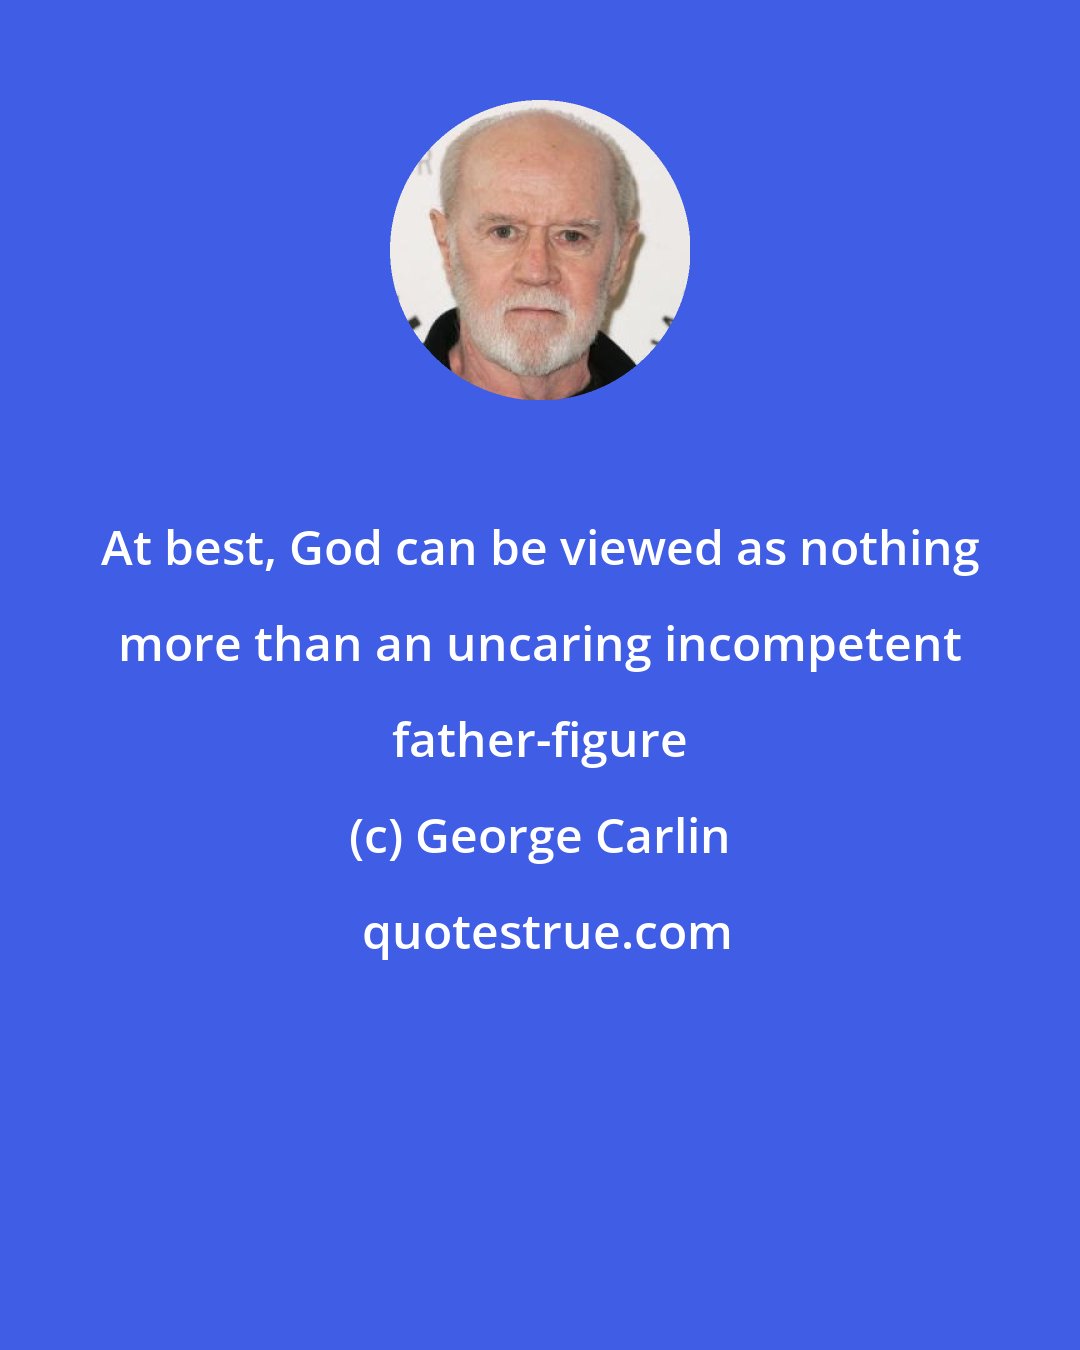 George Carlin: At best, God can be viewed as nothing more than an uncaring incompetent father-figure